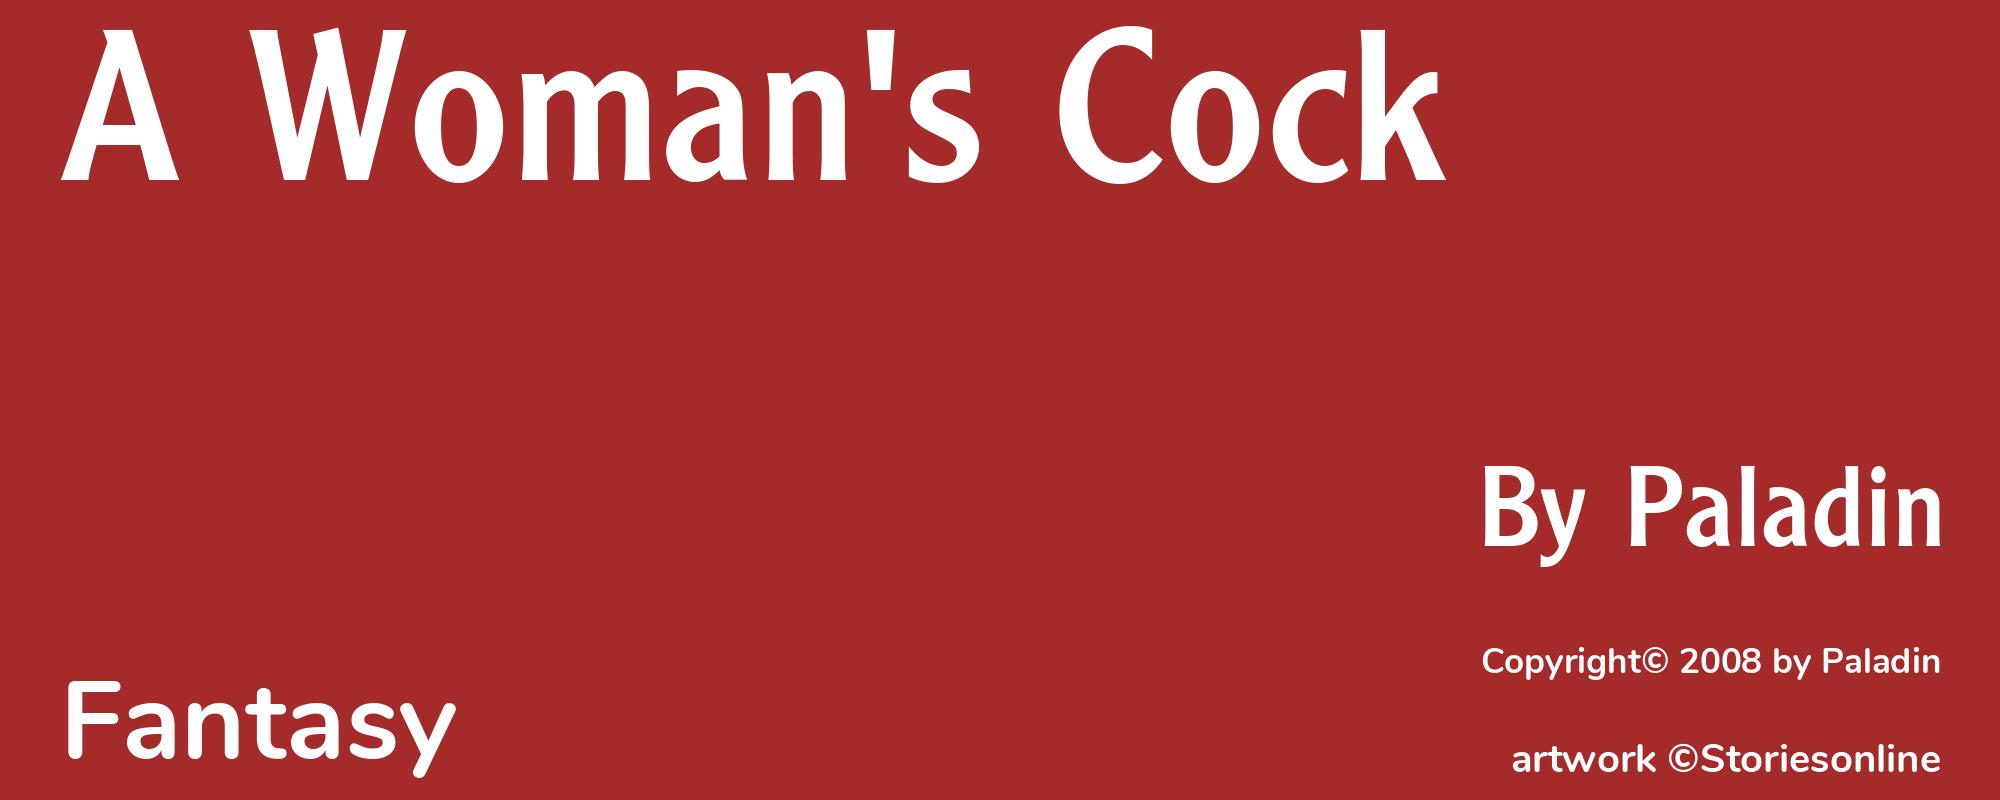 A Woman's Cock - Cover